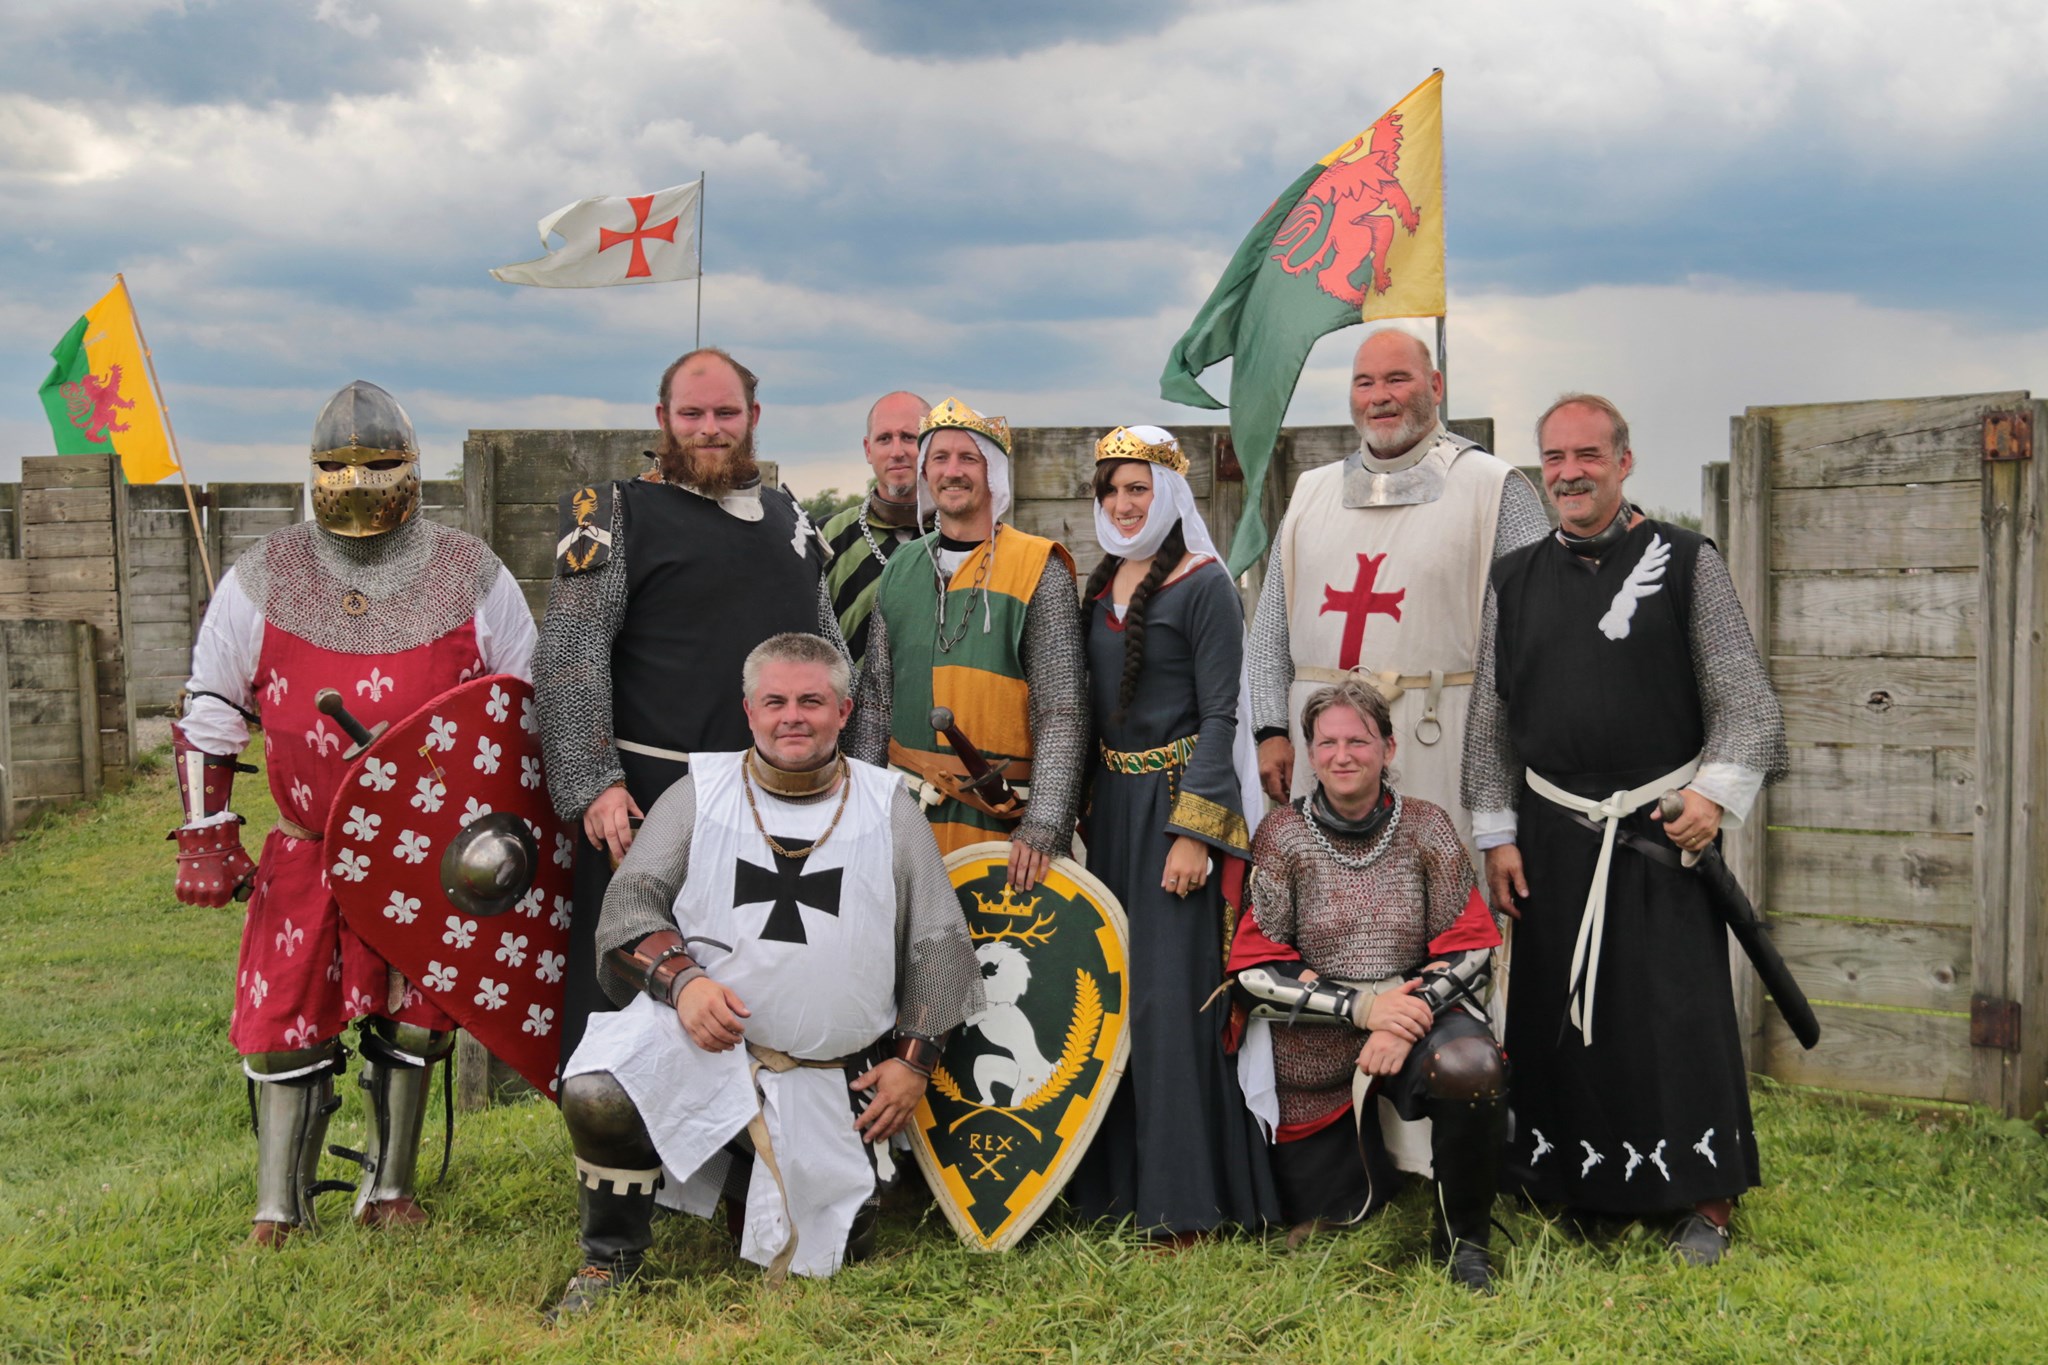 A group of armored combat participants before the 2019 William Marshal tournament at Pennsic